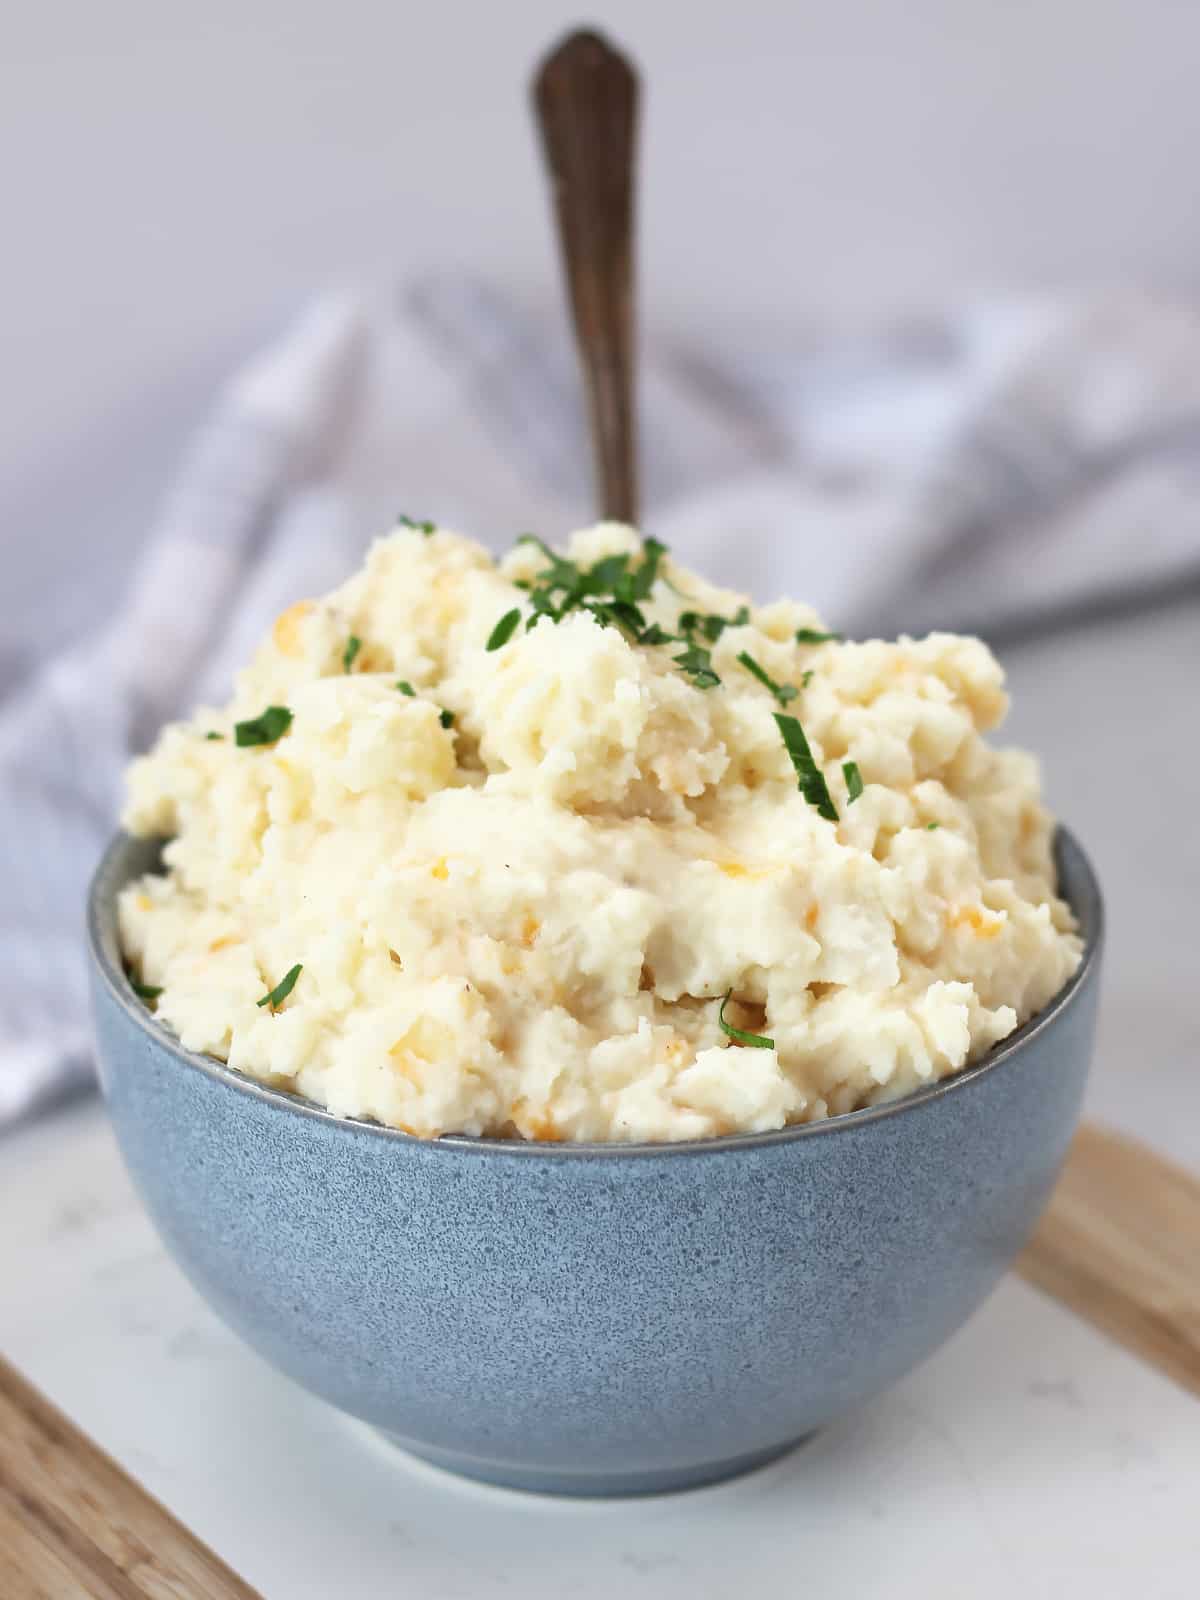 Mashed potato with cheese and garlic in a blue bowl.